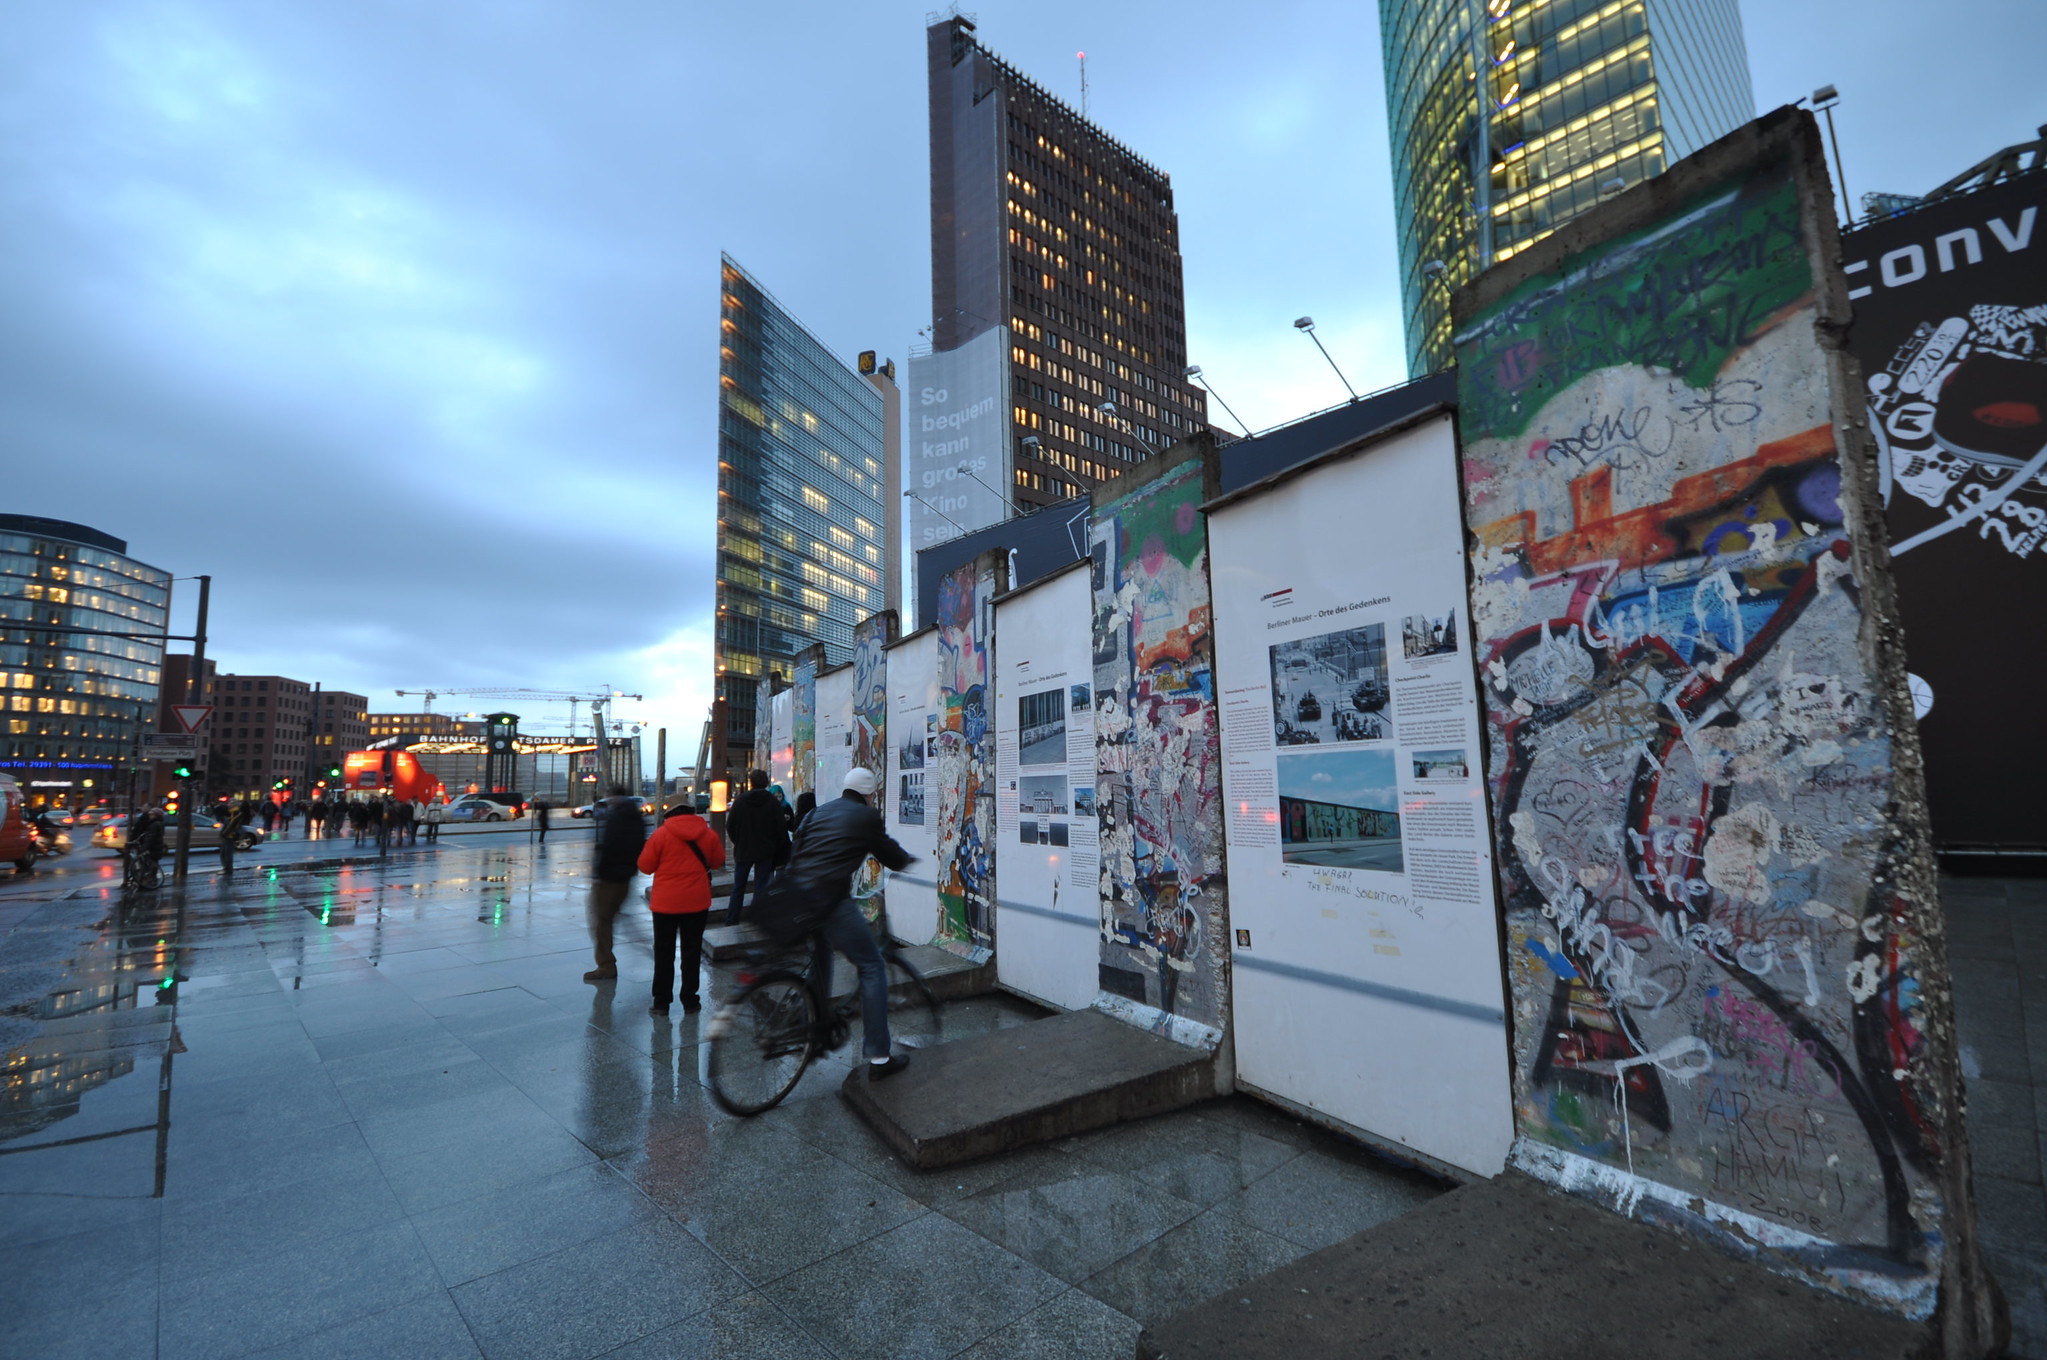 <p>If you're particularly interested in the Berlin Wall, there are excellent alternative to Checkpoint Charlie. For instance, you can book stimulating bike tours that explore the wall's history and even visit parts of the wall that are still standing.</p>